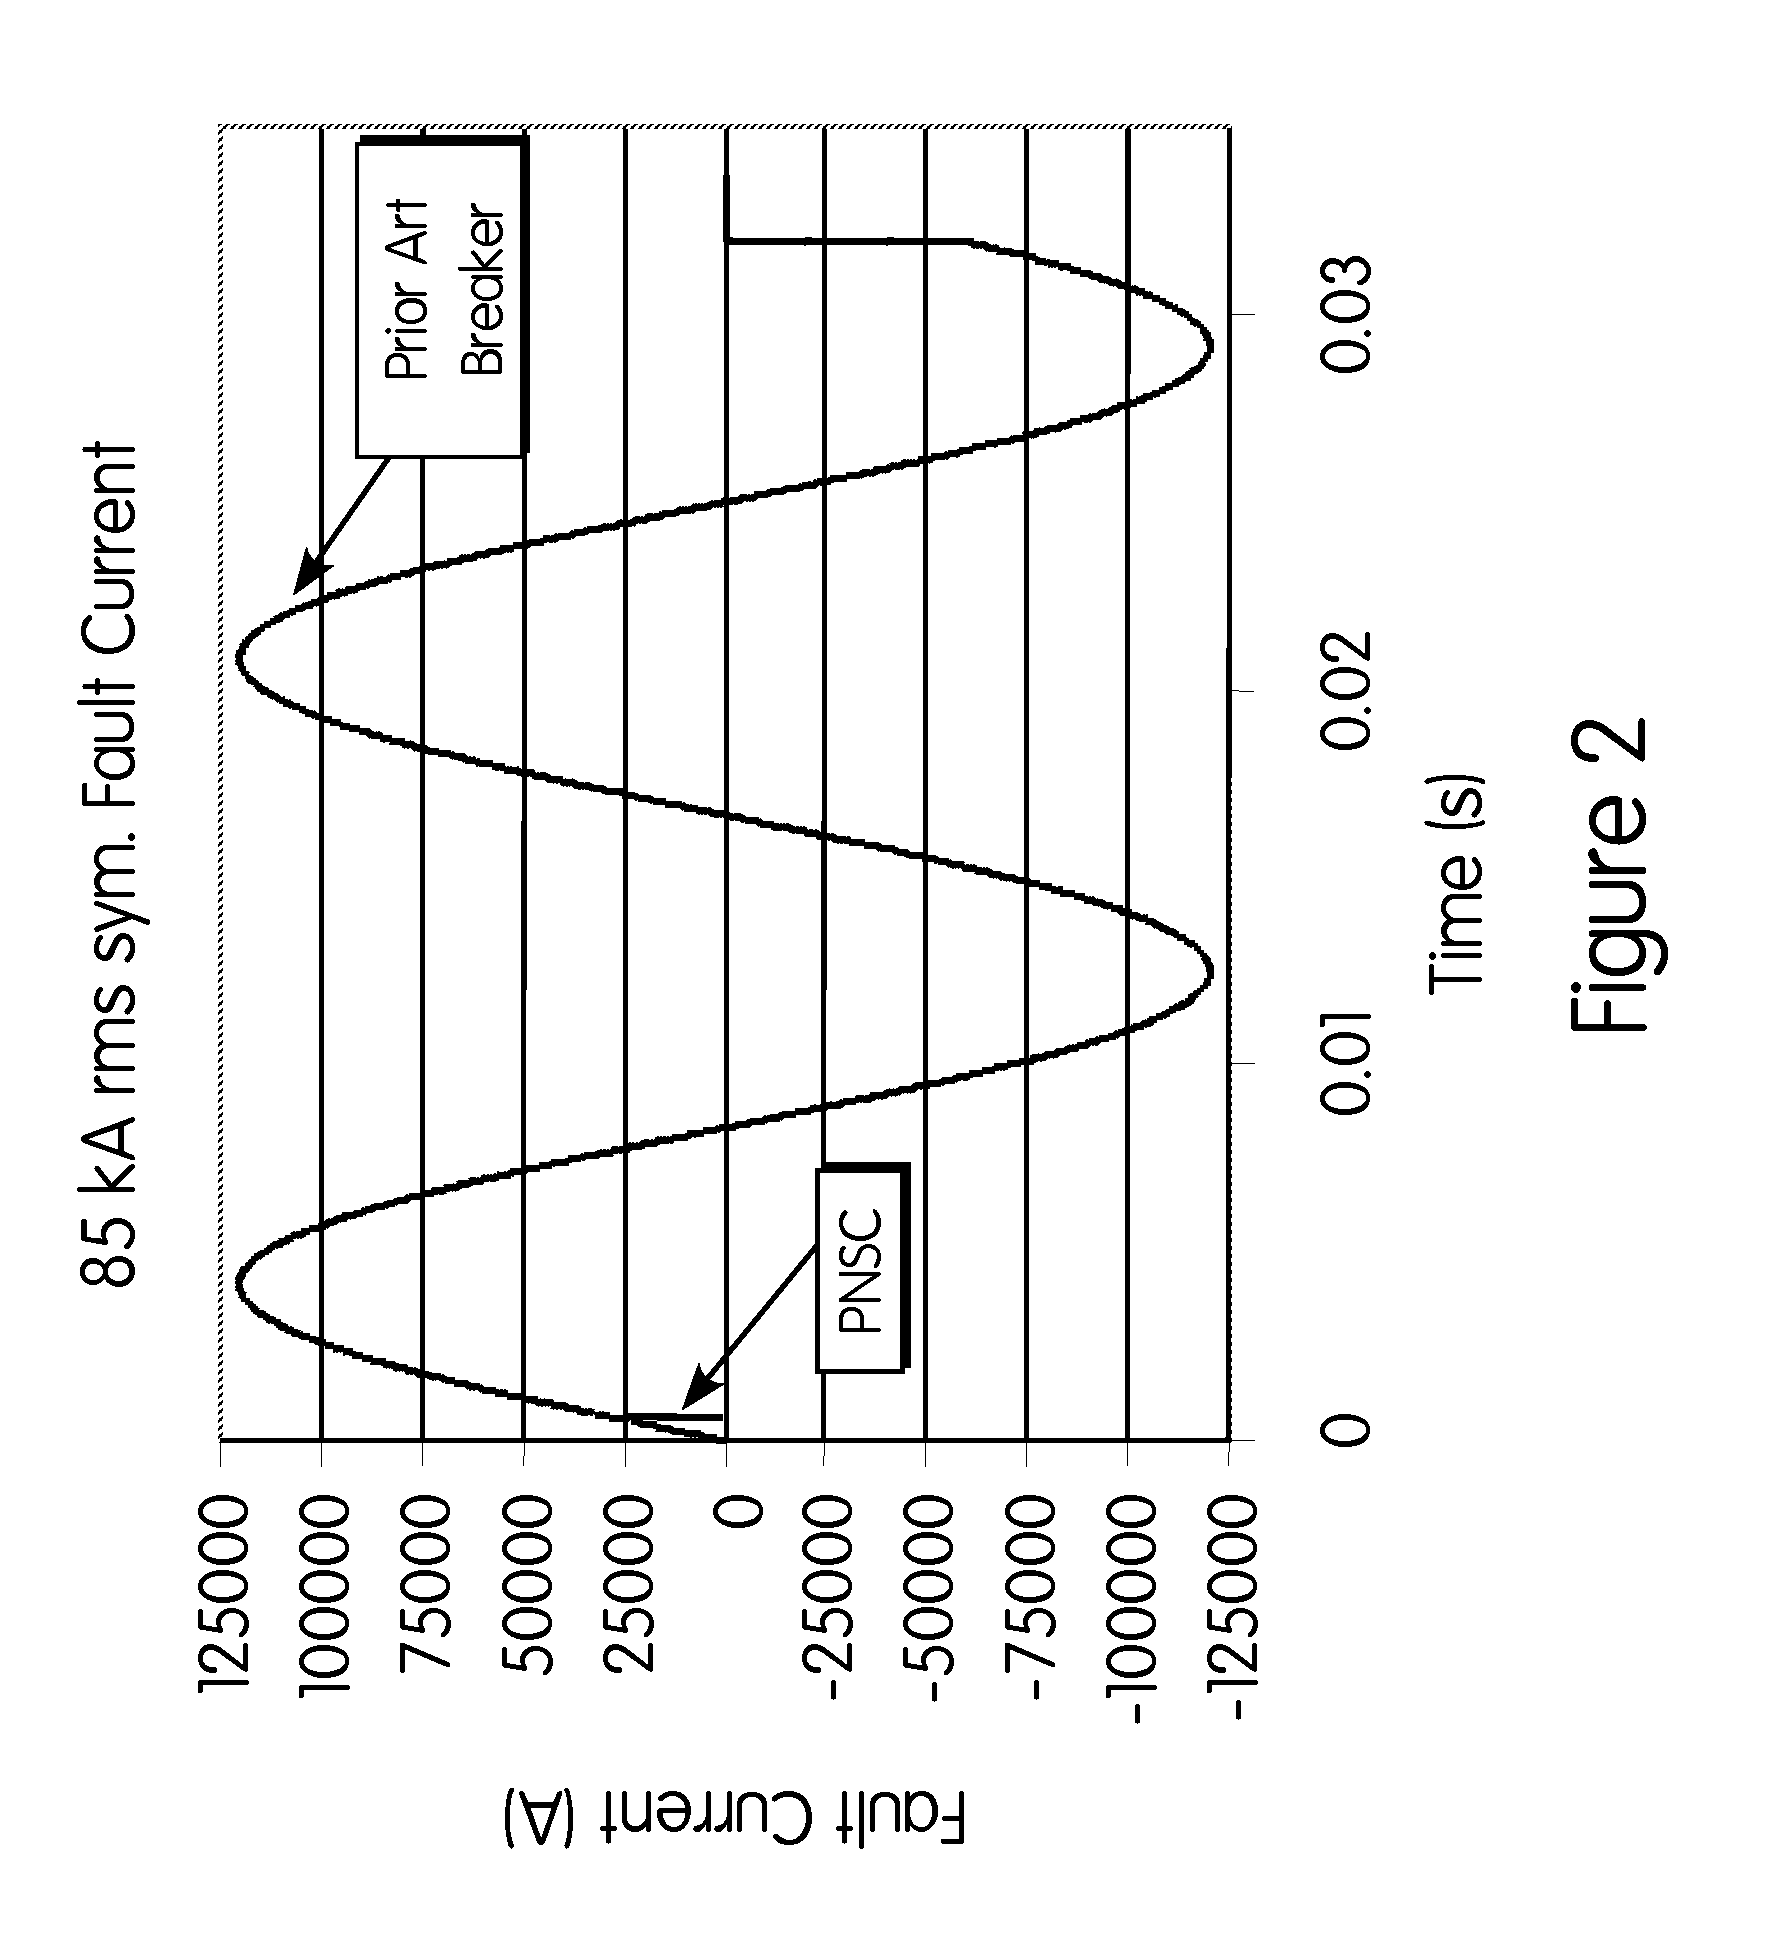 Graded resistance solid state current control circuit